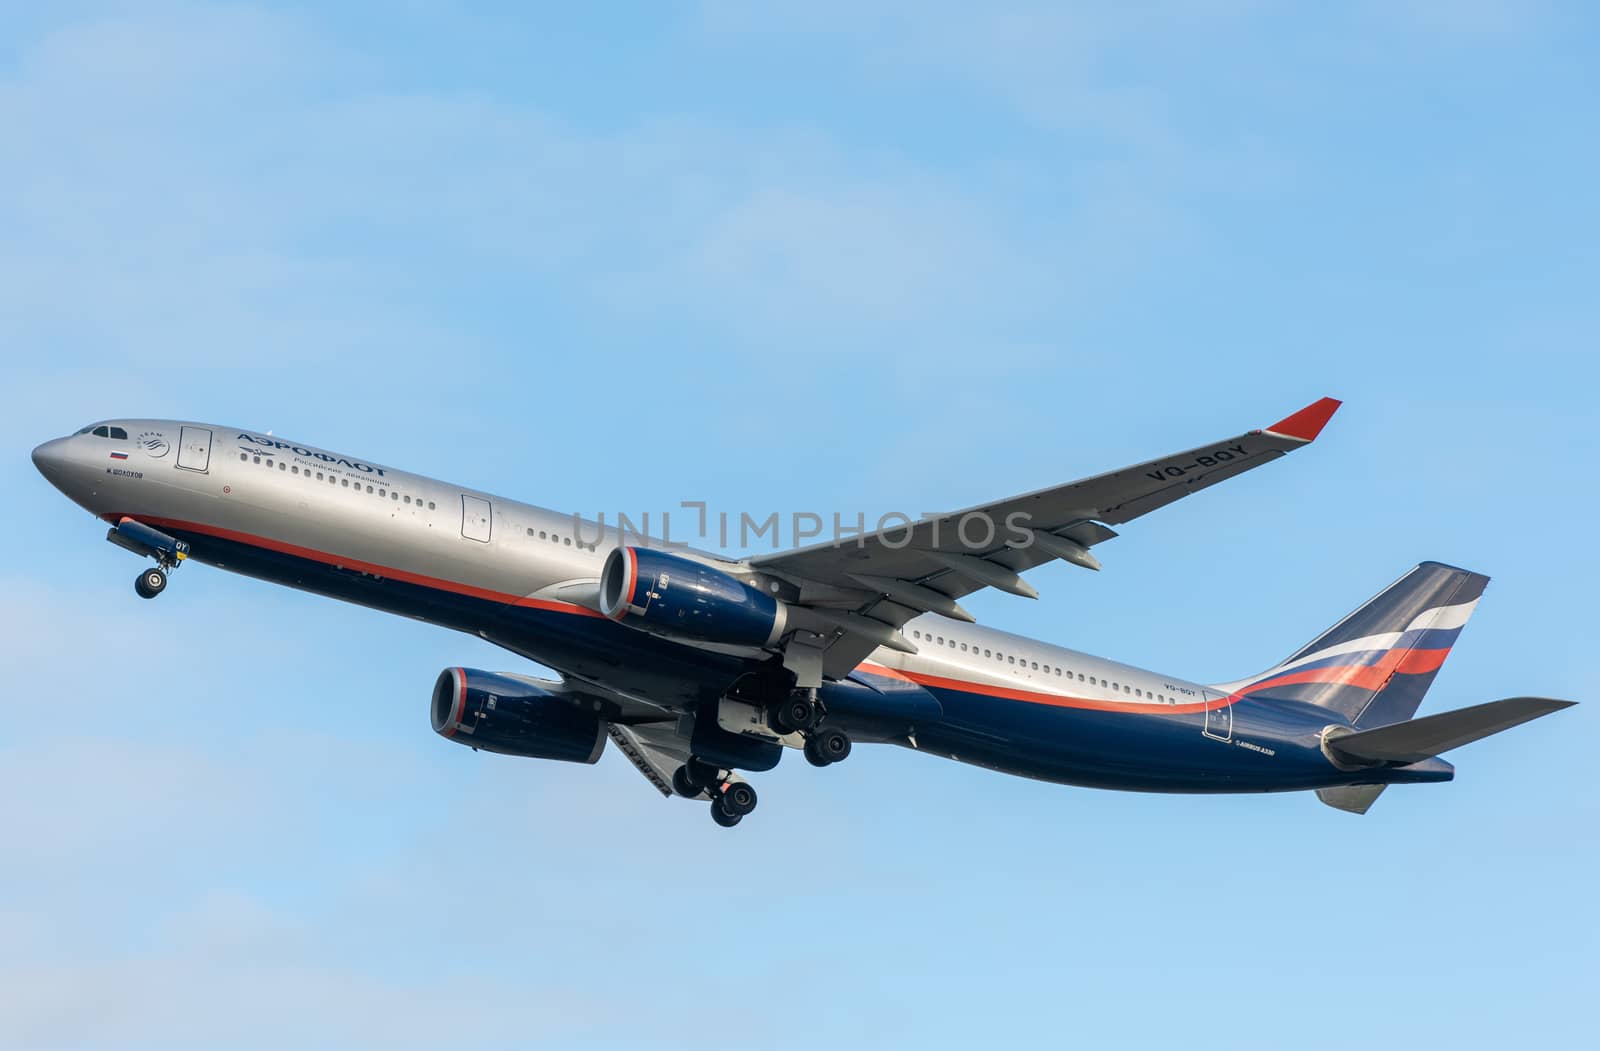 October 29, 2019, Moscow, Russia. Plane 
Airbus A330-300 Aeroflot - Russian Airlines at Sheremetyevo airport